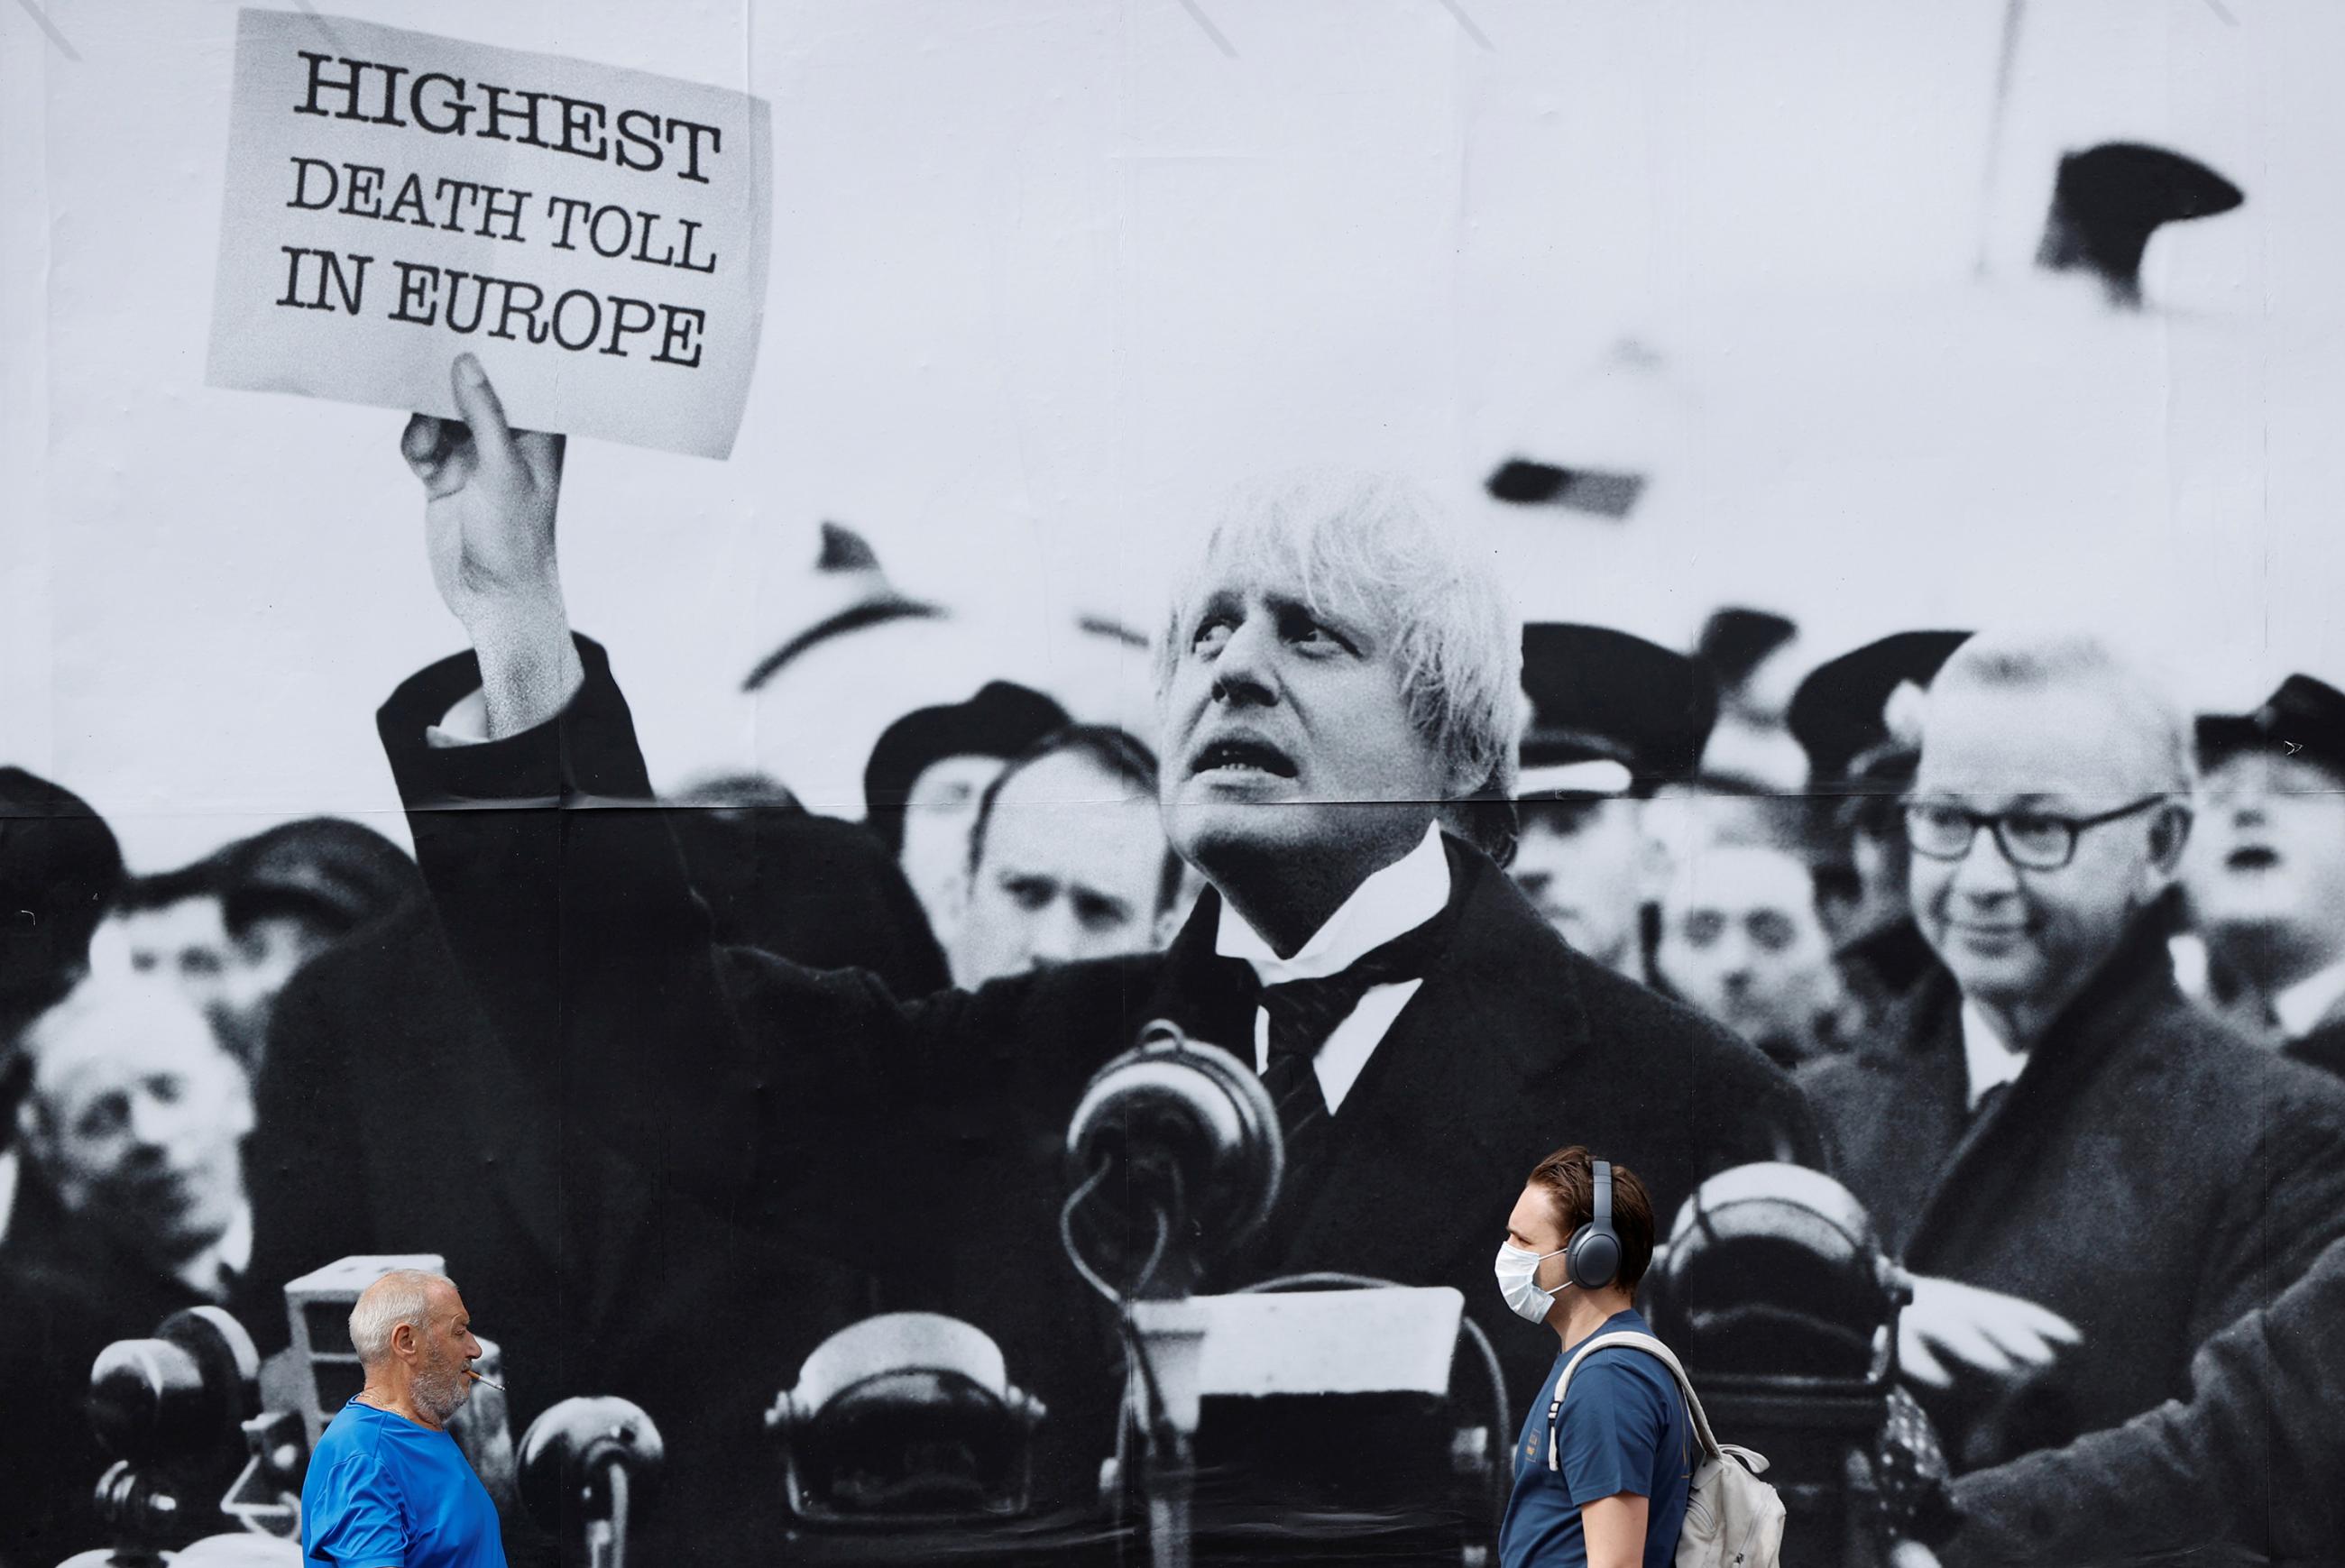 The photo shows a few people walking by a huge sign with a black and white picture of the PM holding up a placard that reads, "Highest Death Toll in Europe." 